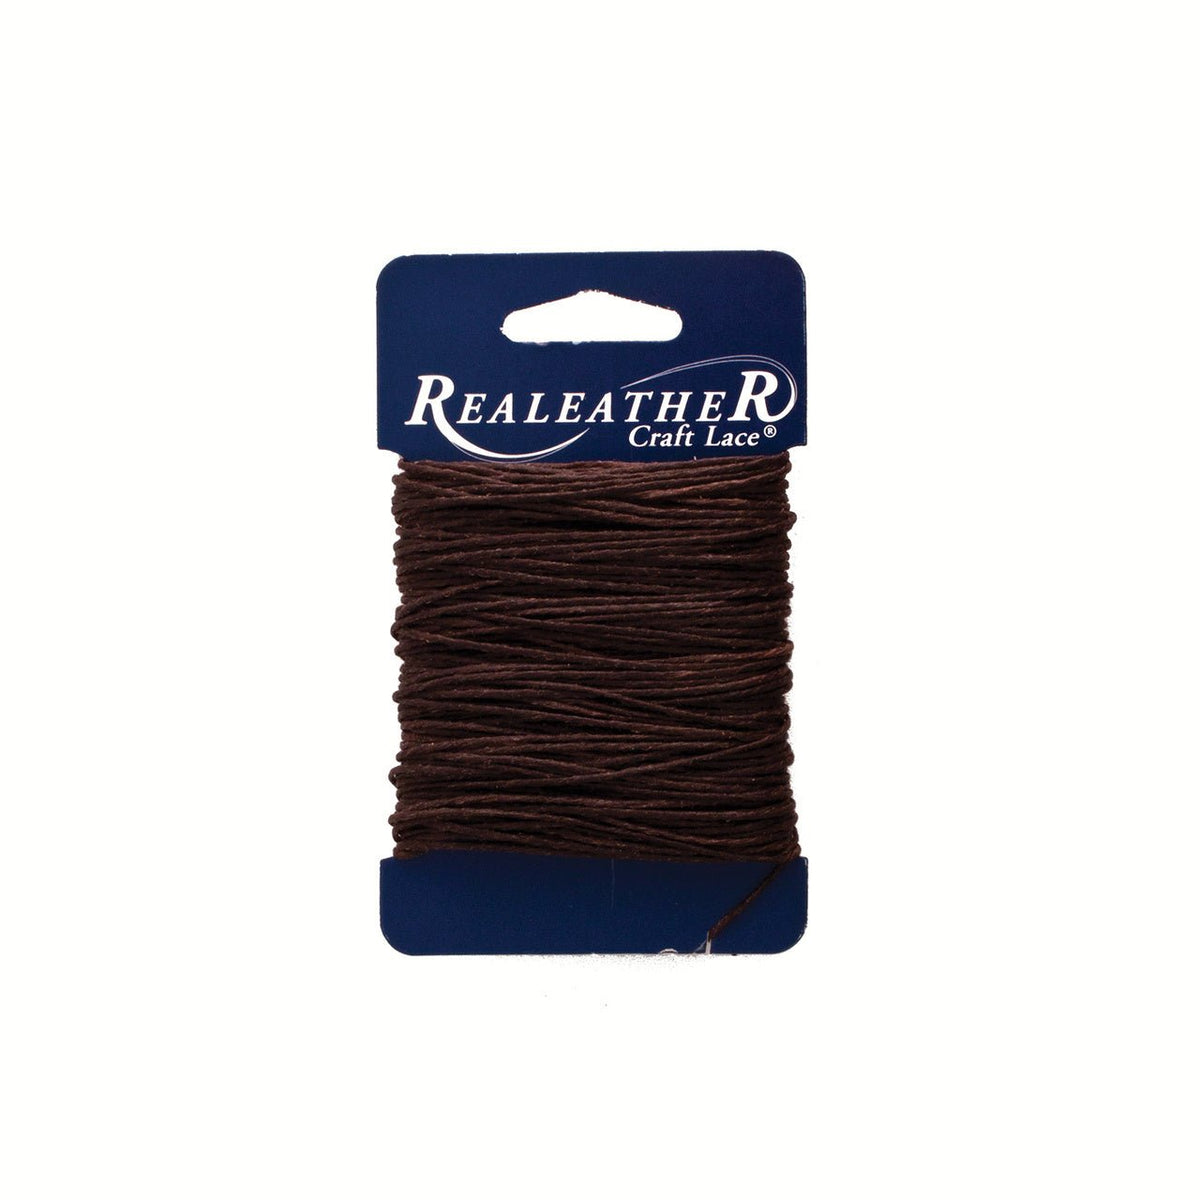 Realeather Waxed Thread - 25 yards Brown - merriartist.com